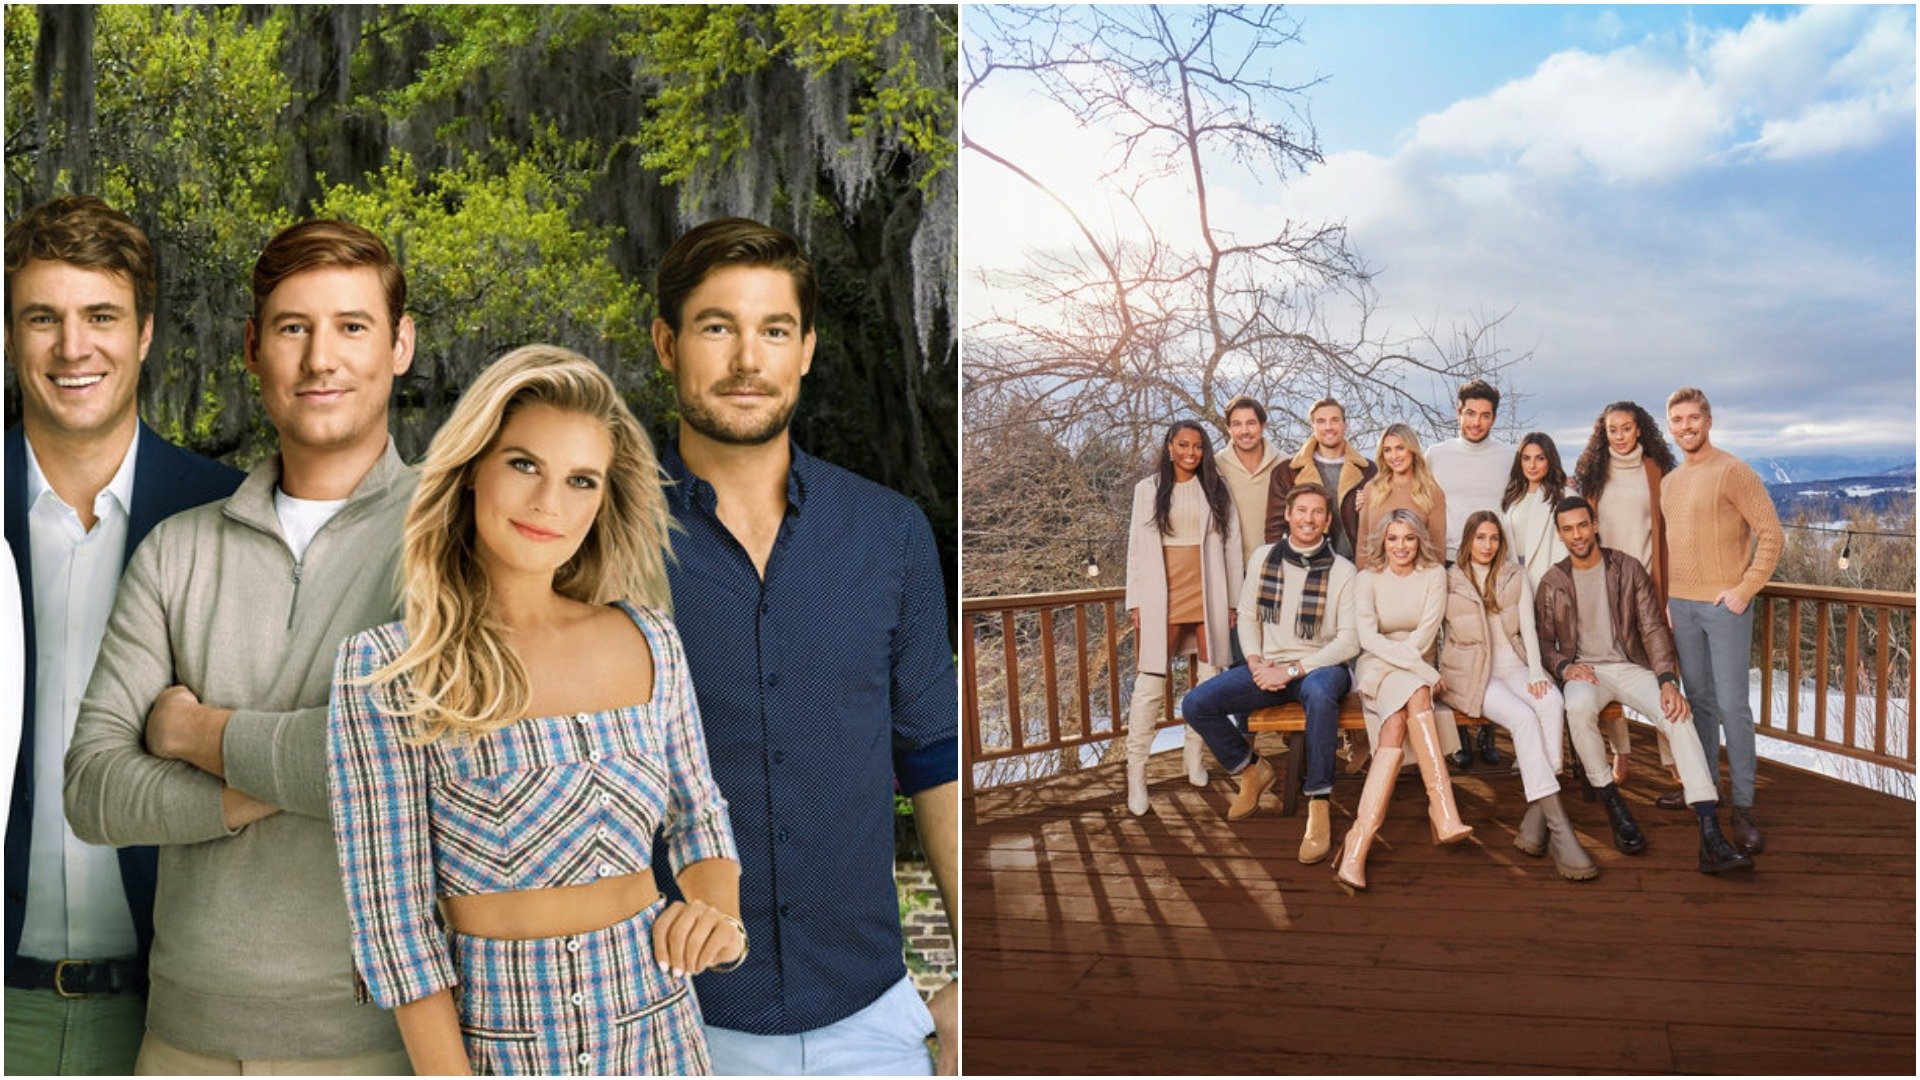 Southern Charm and Winter House are shot using very different approaches